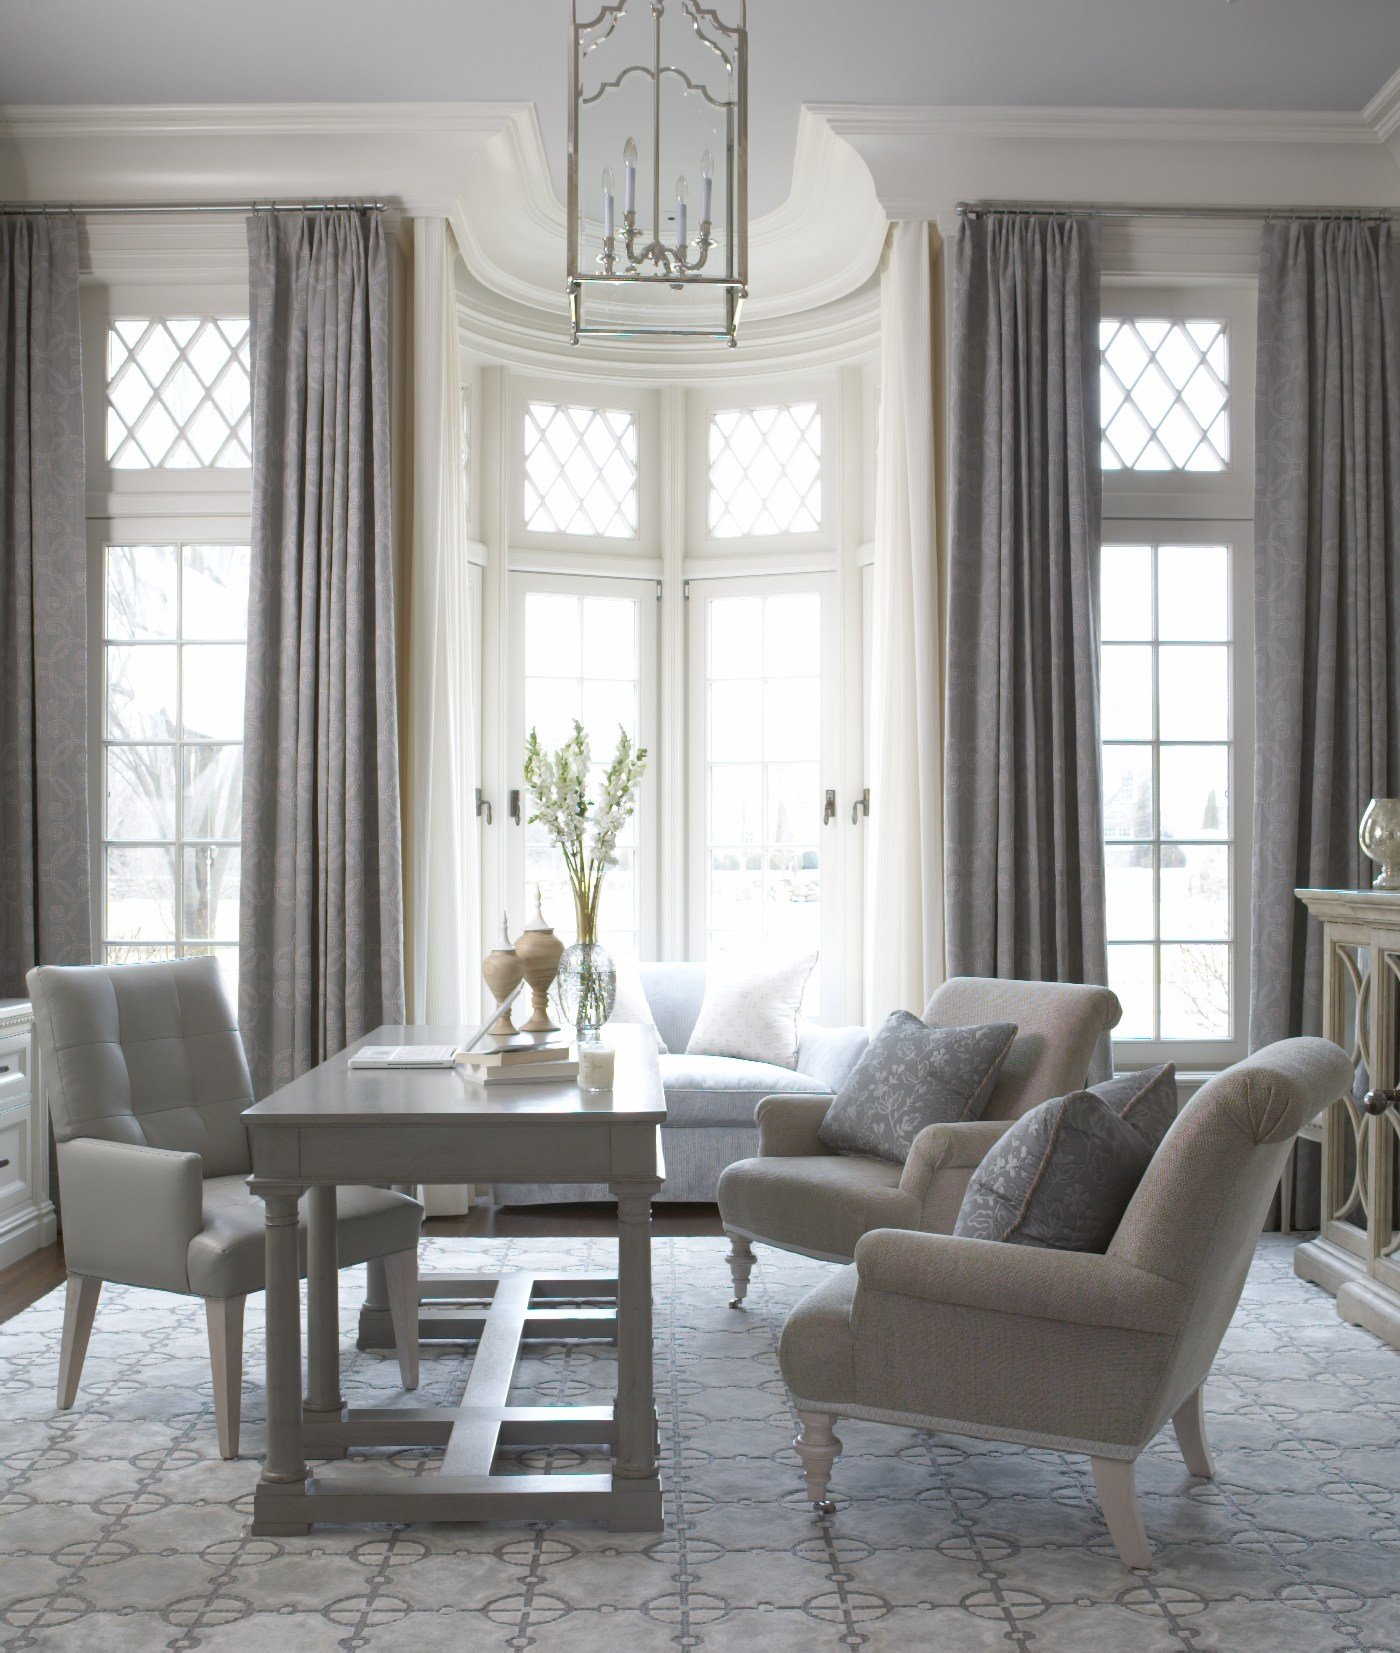 26-minimal-simple-seating-area-gray-white-details-greenwich-classy-country-house-rinfret-interior-designs.jpg